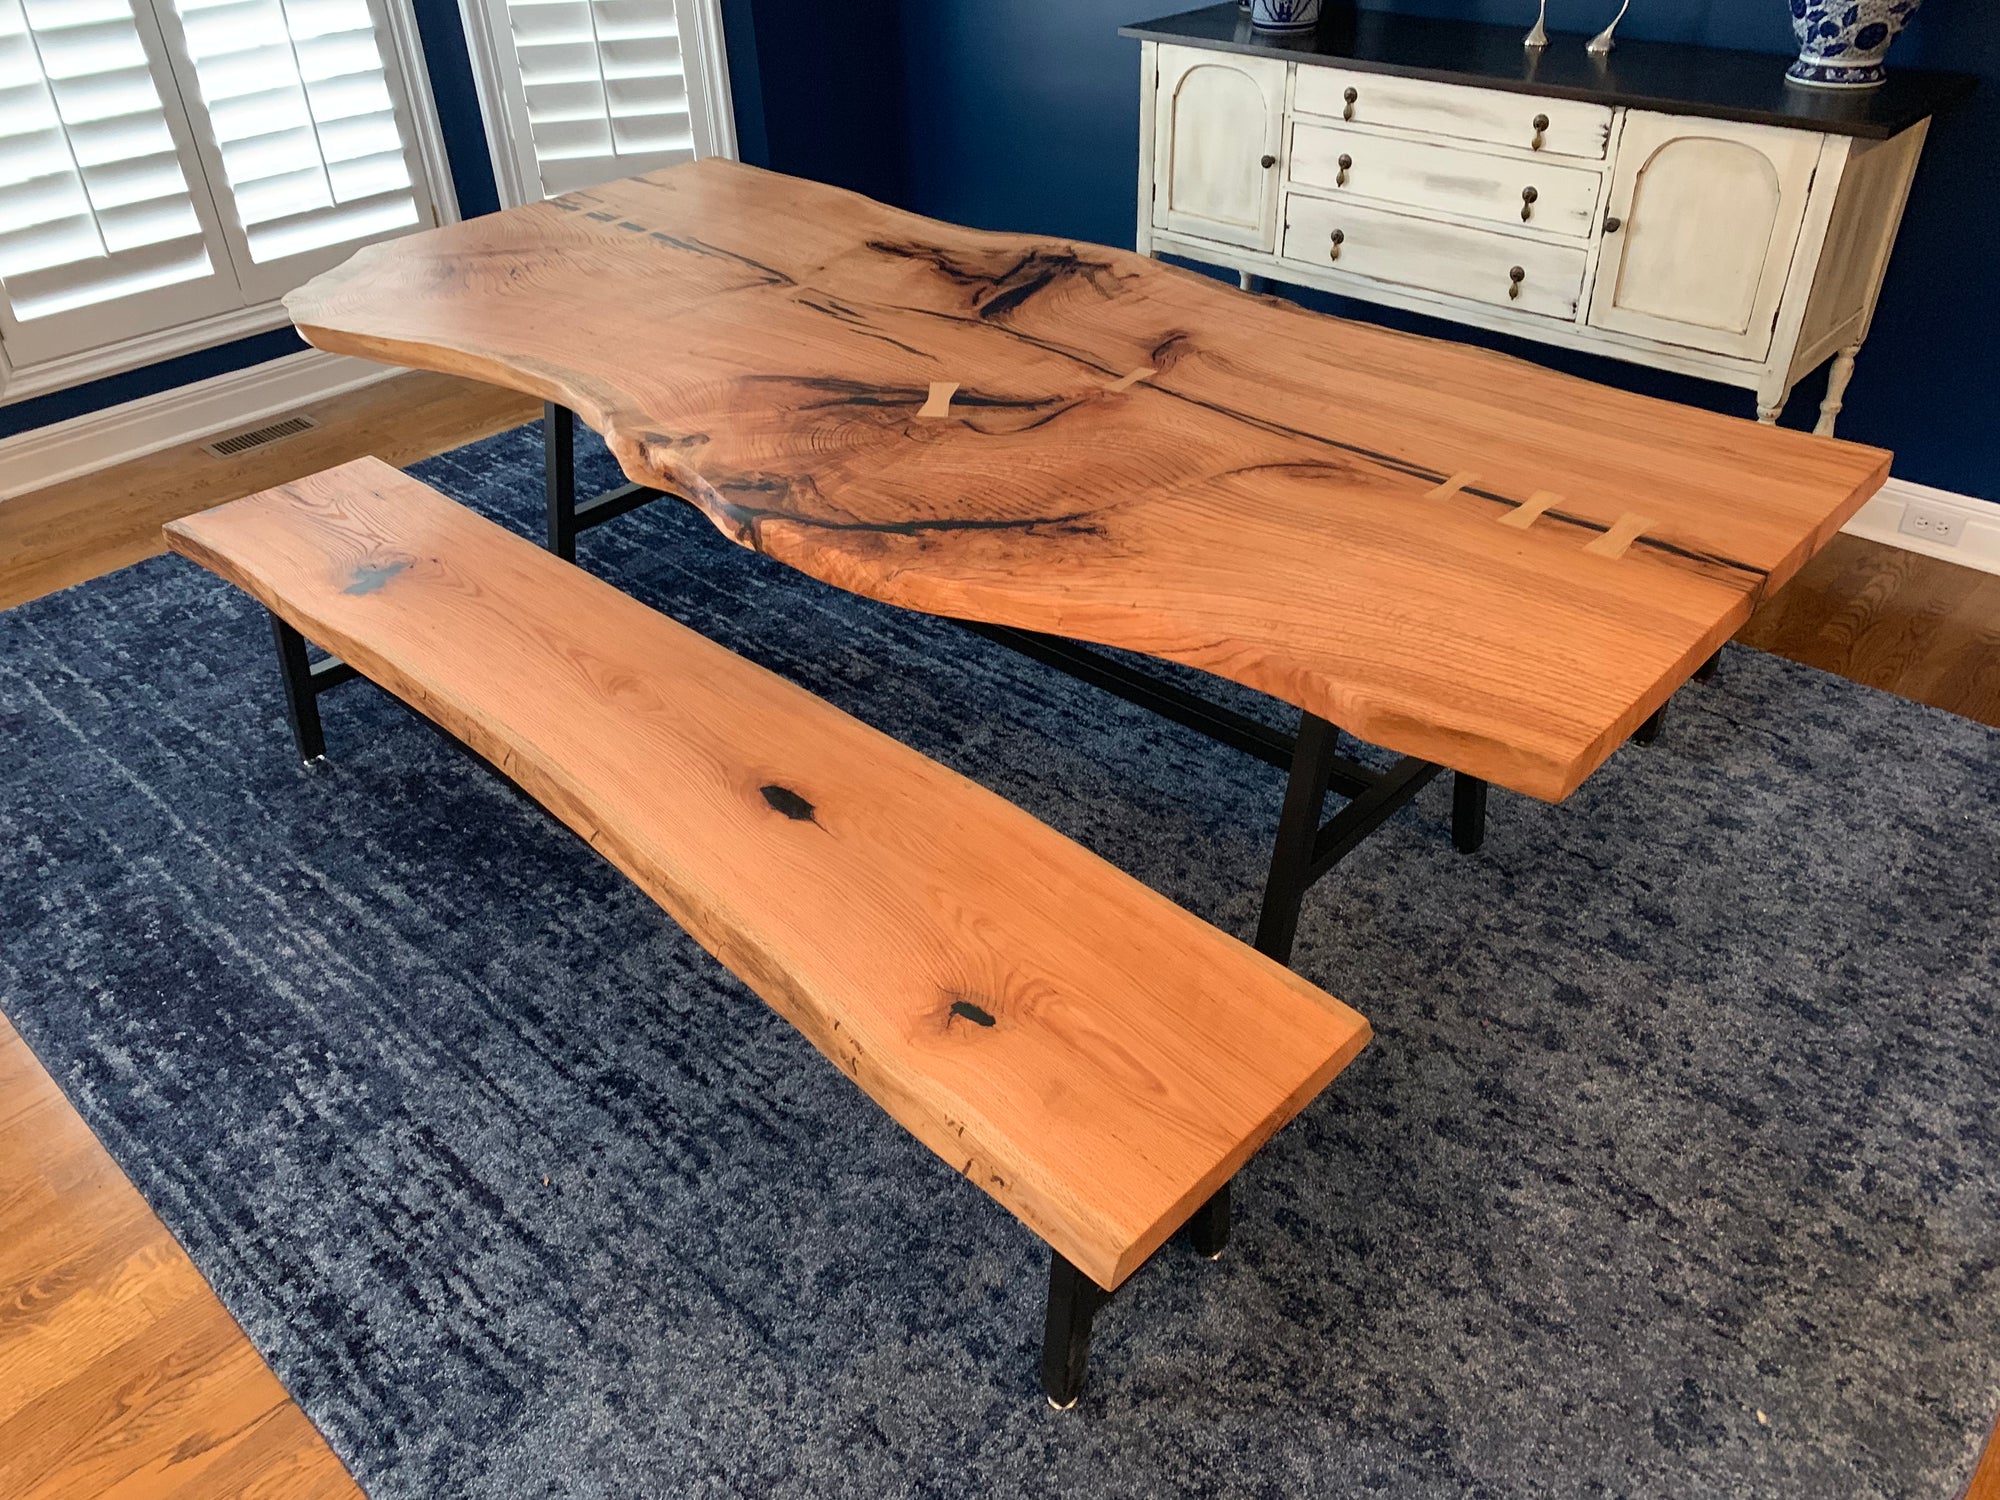 single slab table with bench